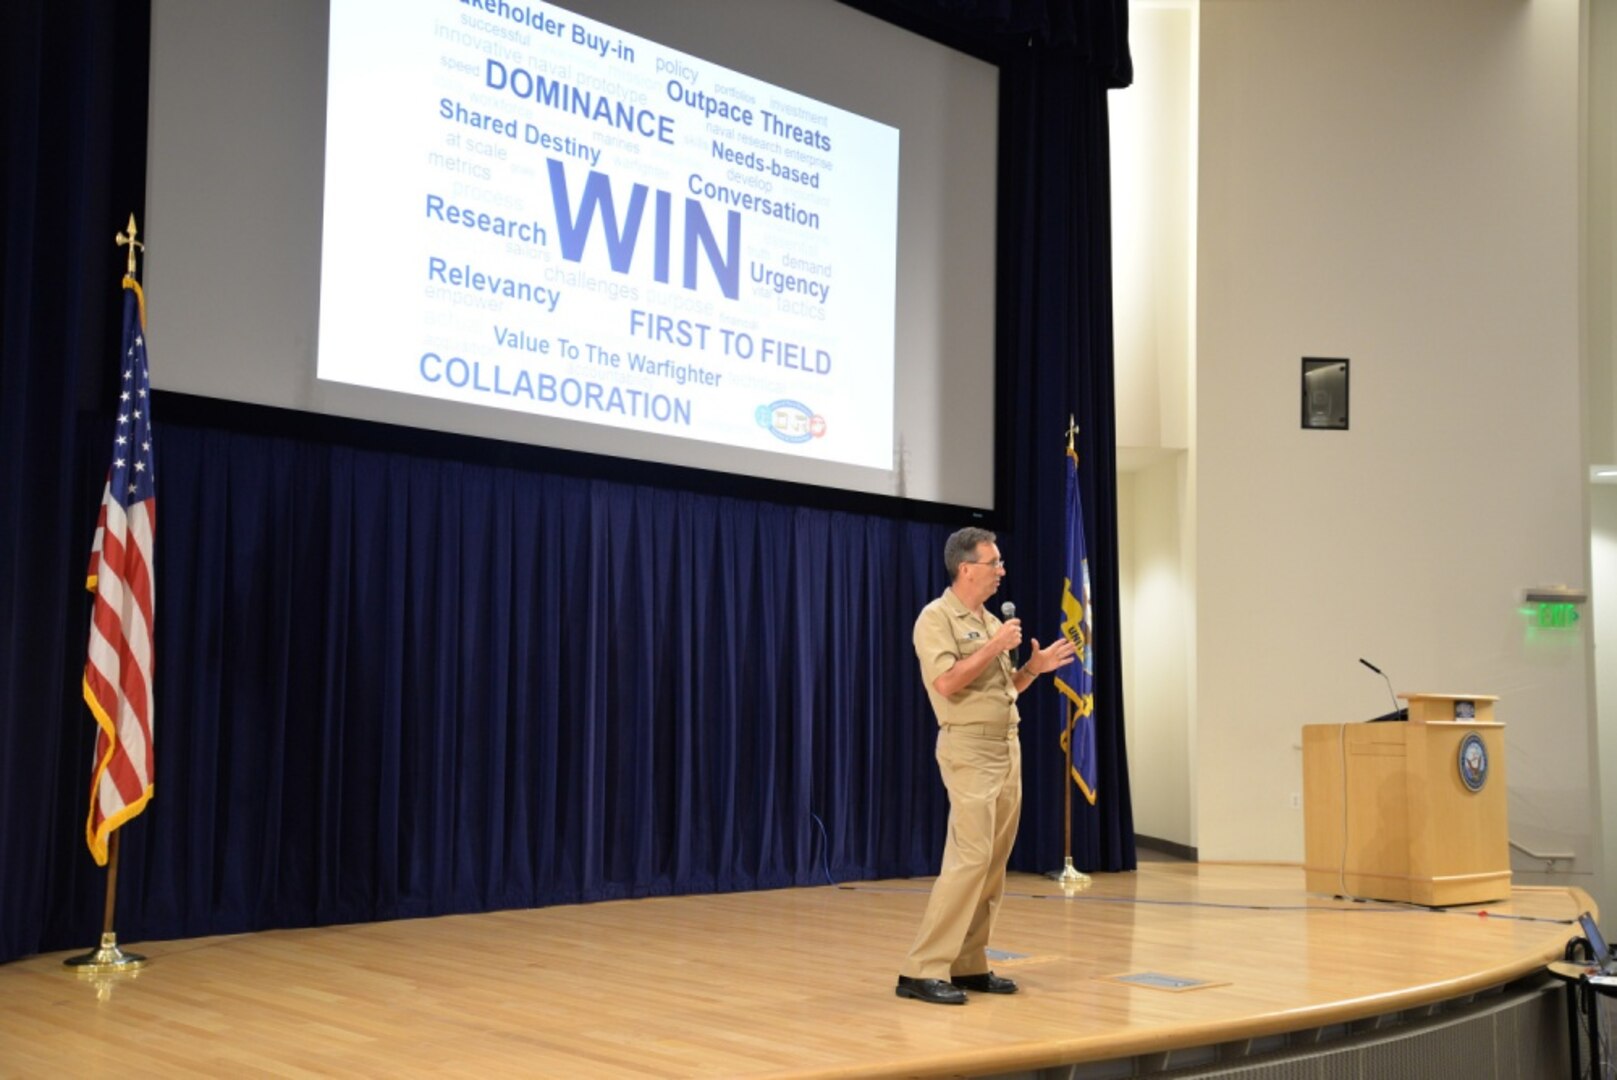 Chief of Naval Research Rear Adm. David Hahn speaks to representatives of the Naval Research and Development Establishment at a collaboration forum on July 31, 2018, at Naval Surface Warfare Center, Carderock Division in West Bethesda, Md. (U.S. Navy photo by Kelley Stirling/Released).